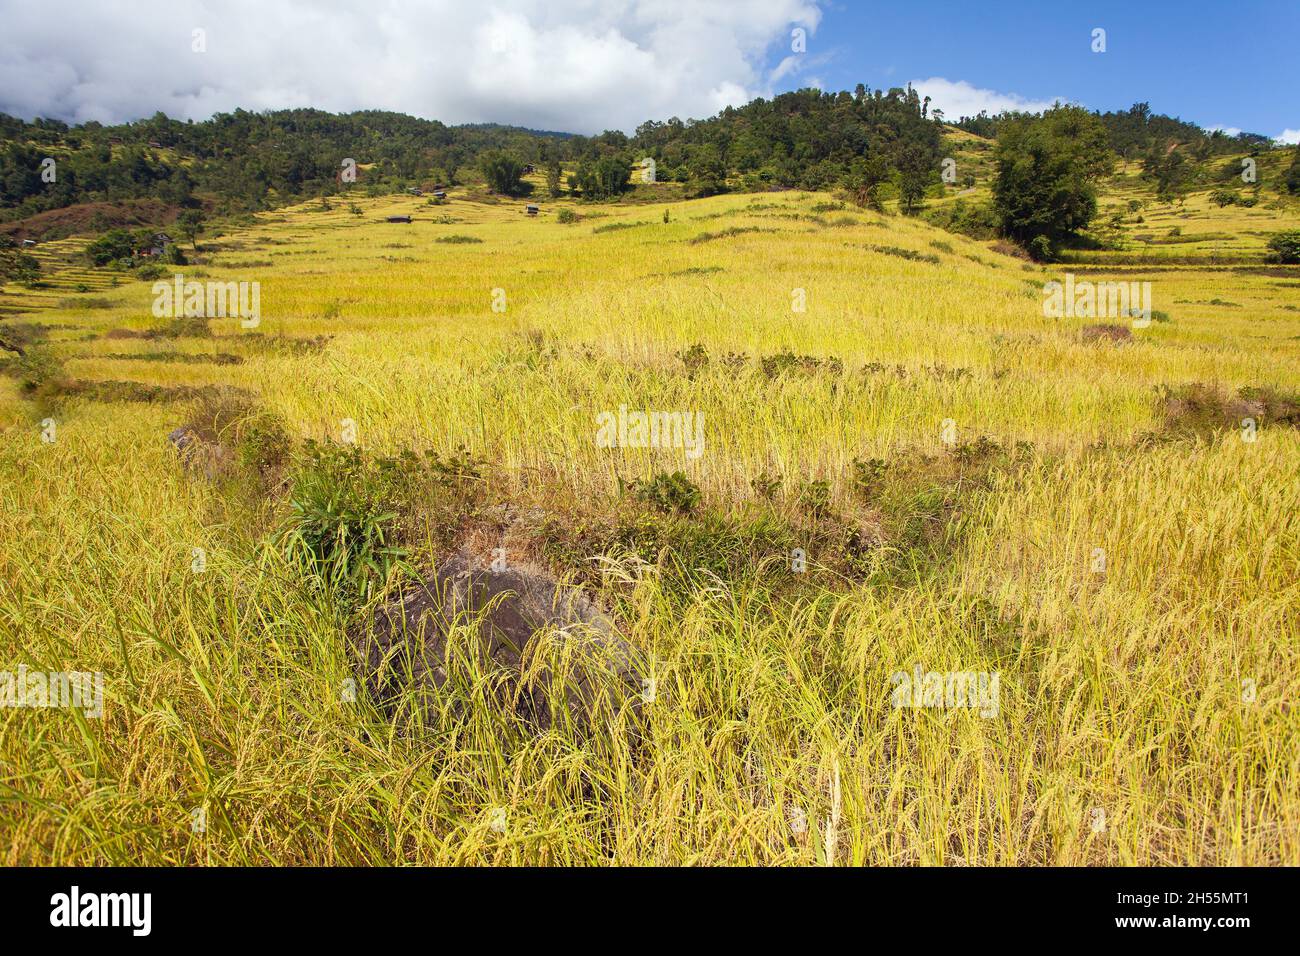 golden terraced rice or paddy field in Nepal Himalayas mountains beautiful himalayan landscape Stock Photo